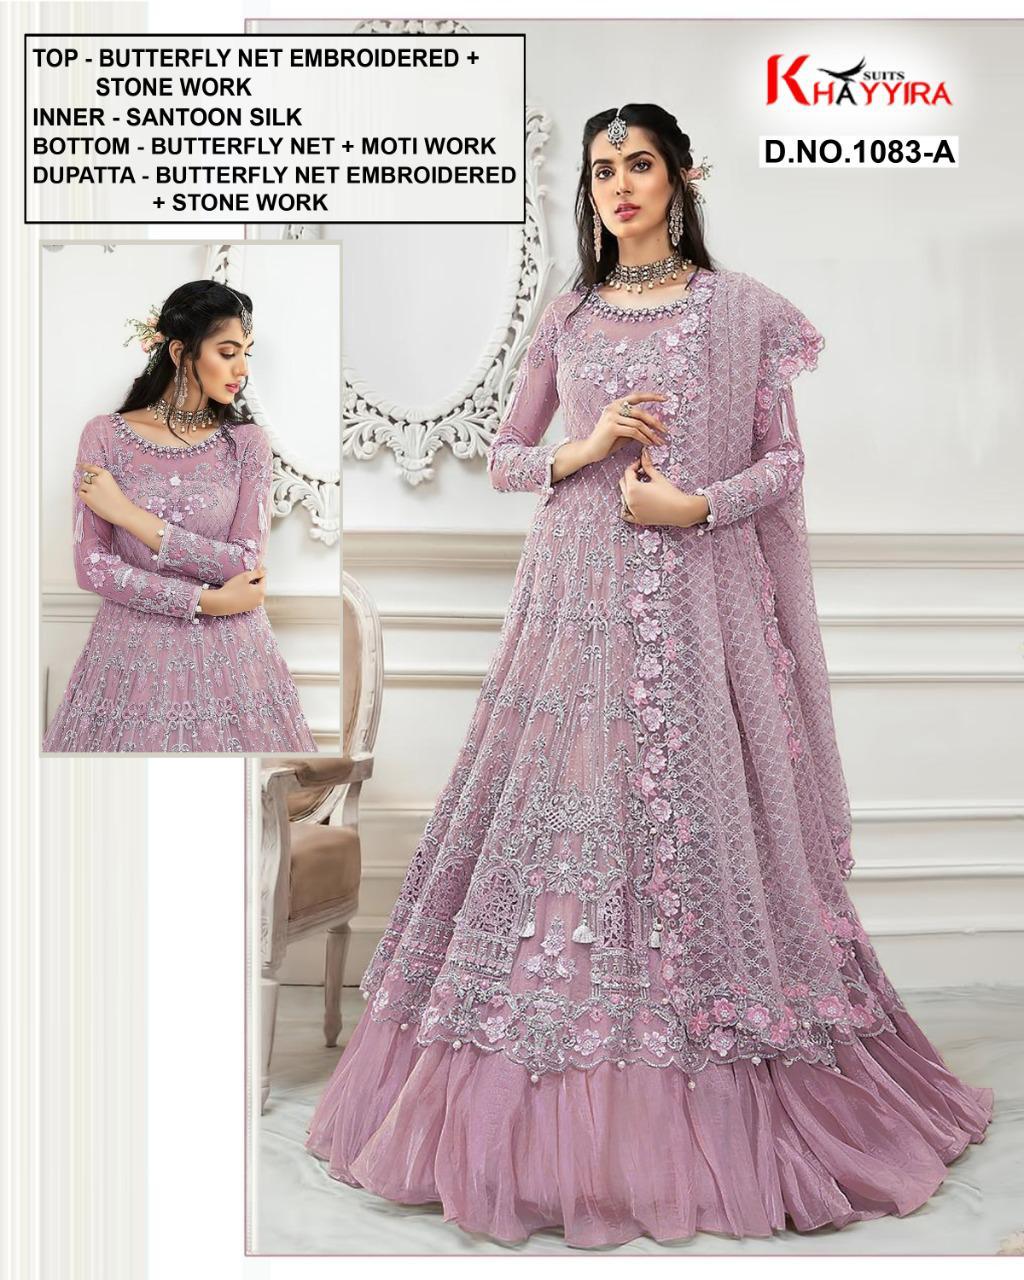 Khayyira Suits D No 1083 A Gown Semi Stitch Single Wholesale Supplier United Kingdome UK for Reseller